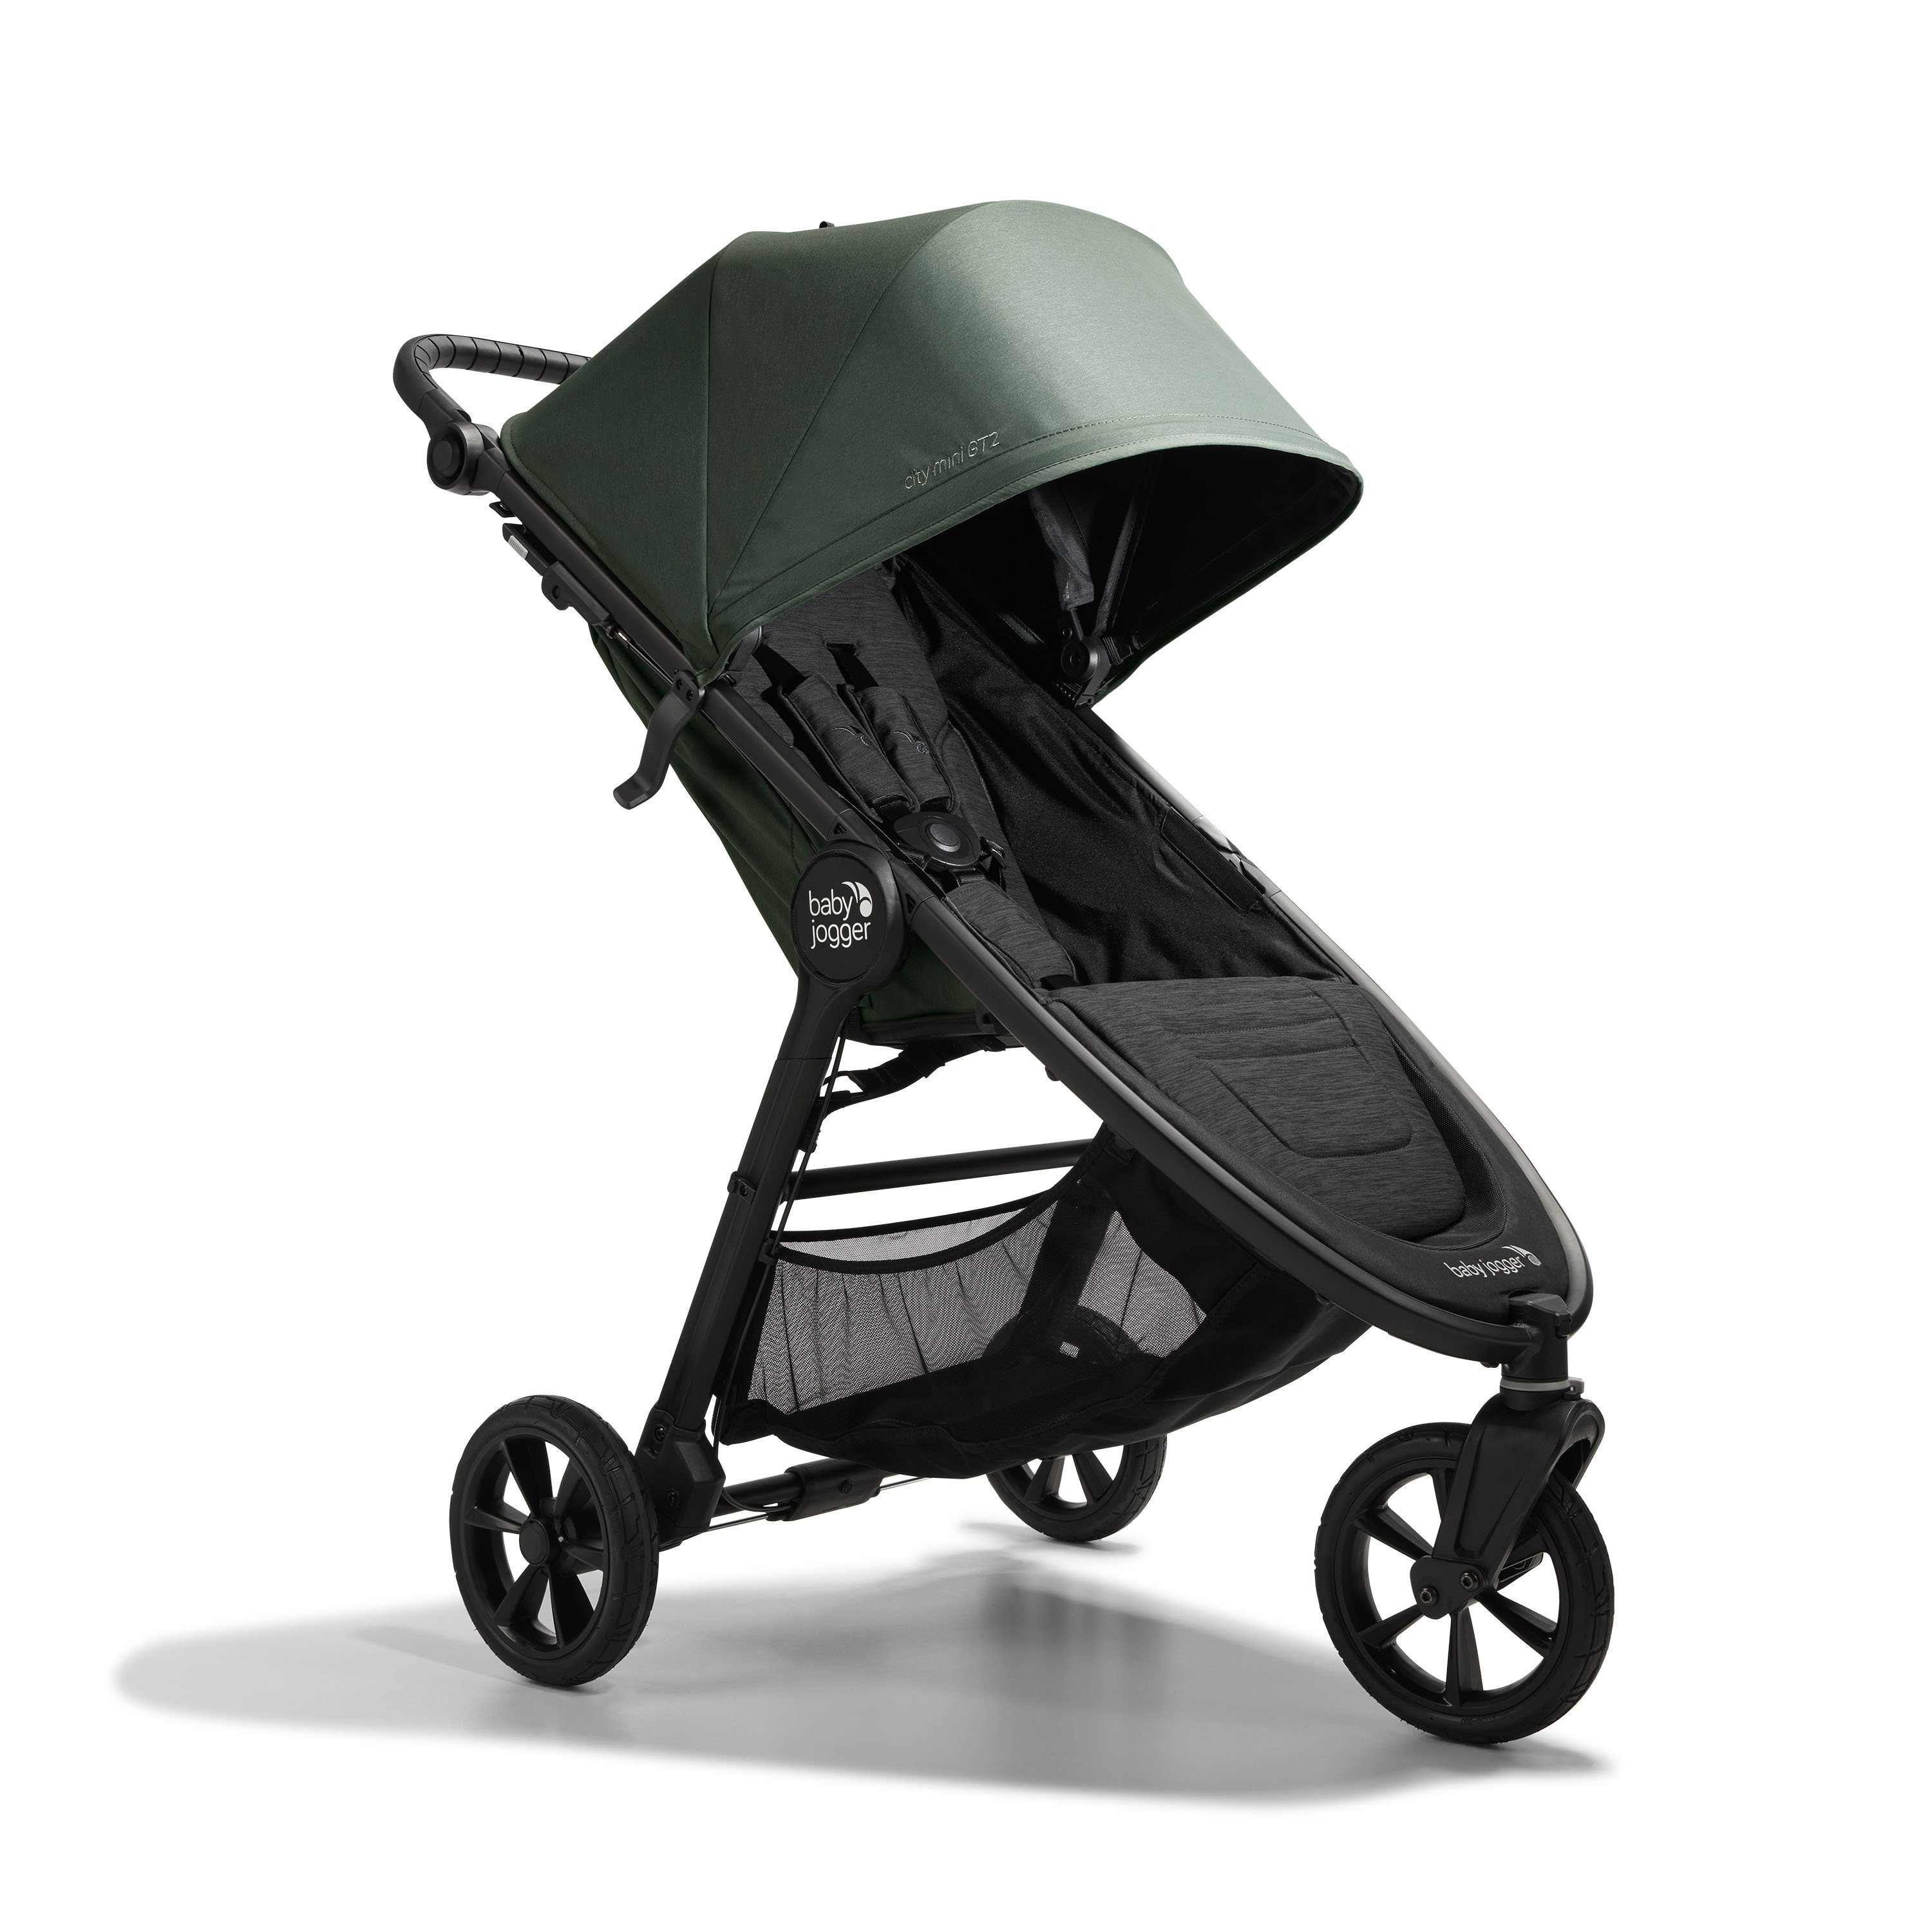 Pushchair Footmuff Cosy Toes Compatible with Jogger City Select Lux buggy 